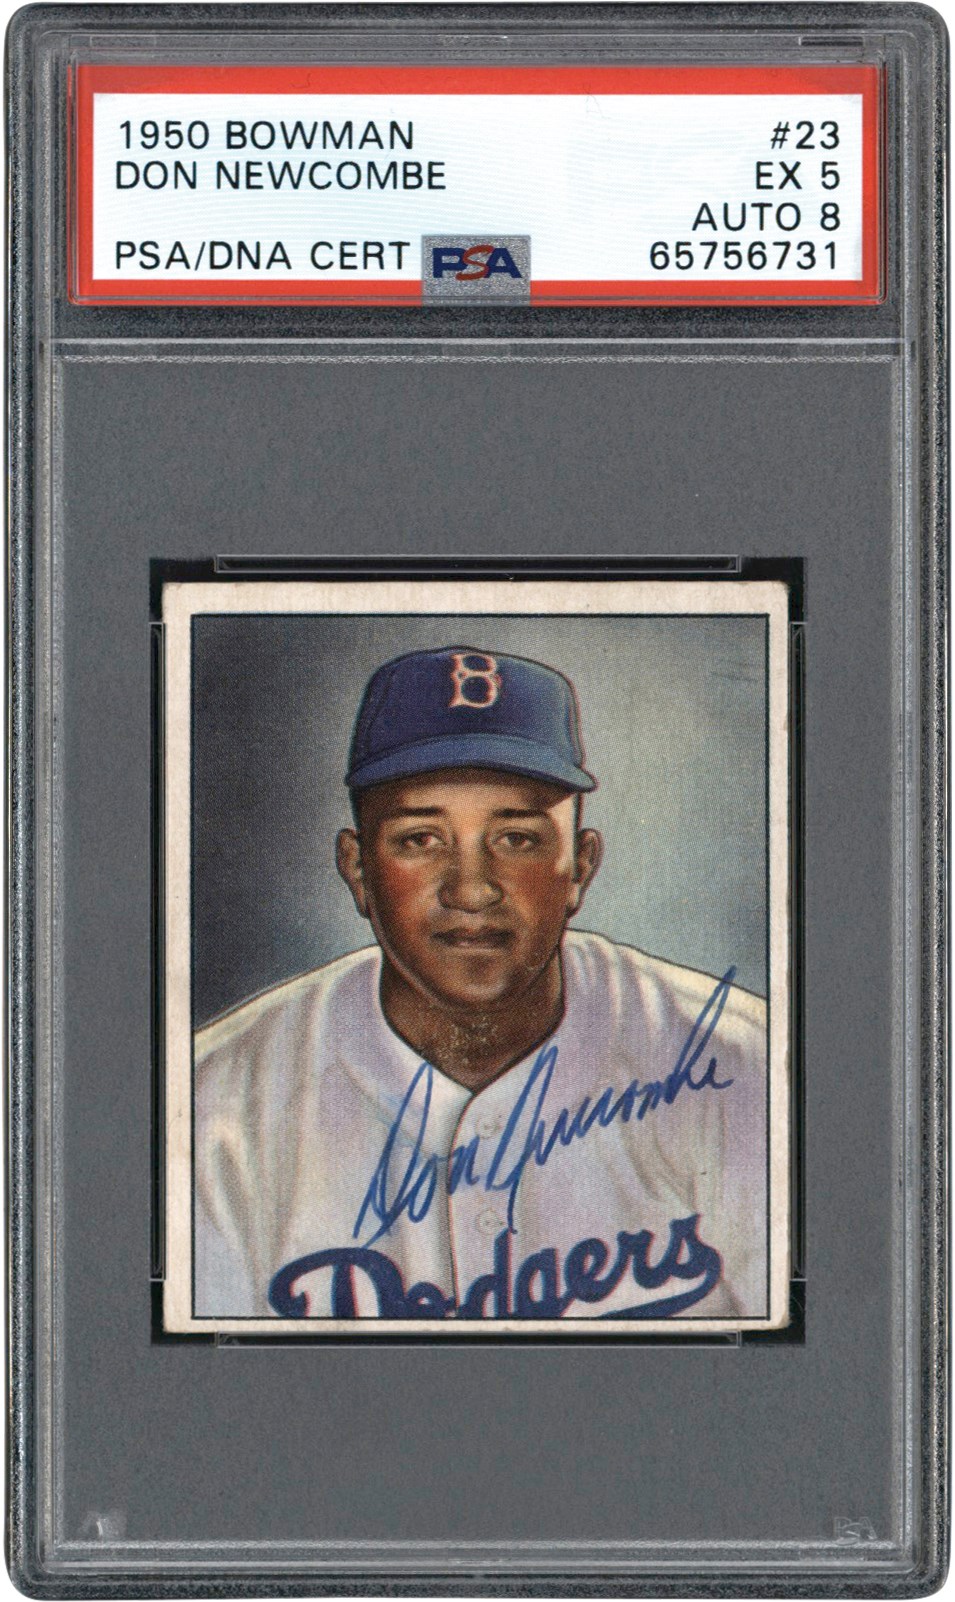 - Signed 1950 Bowman #23 Don Newcombe Rookie Card PSA EX 5 Auto 8 (Pop 2 Highest Graded)